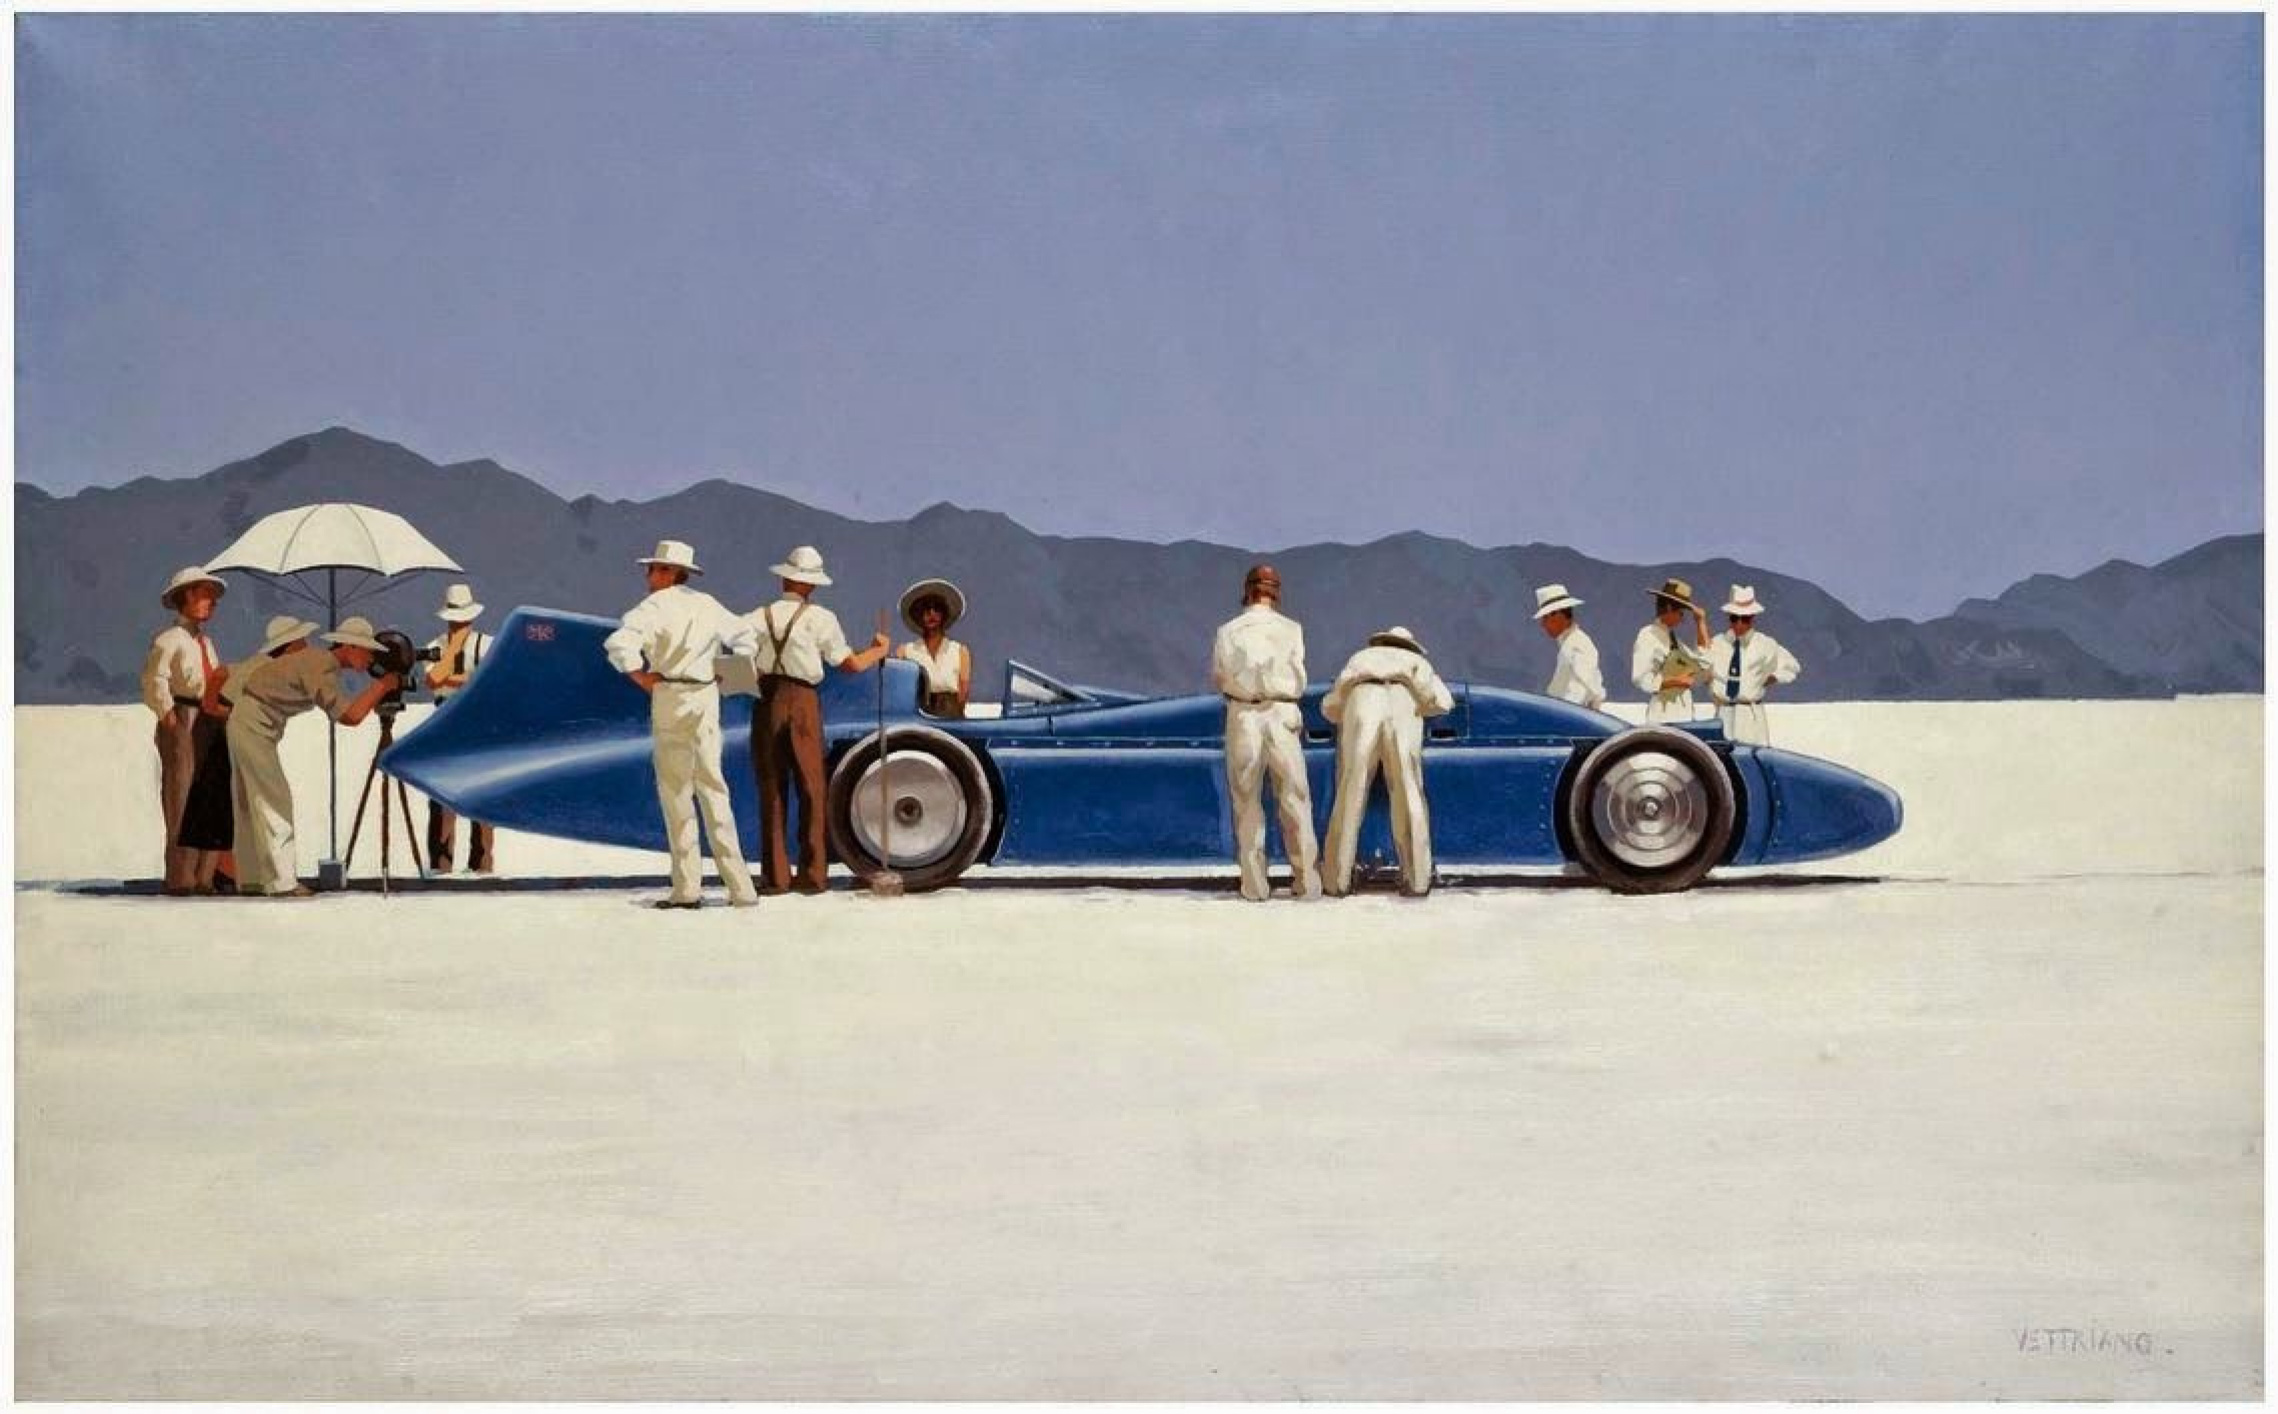 Blue bird, 1951 by Jack Vettriano History, Analysis and Facts Arthive photo